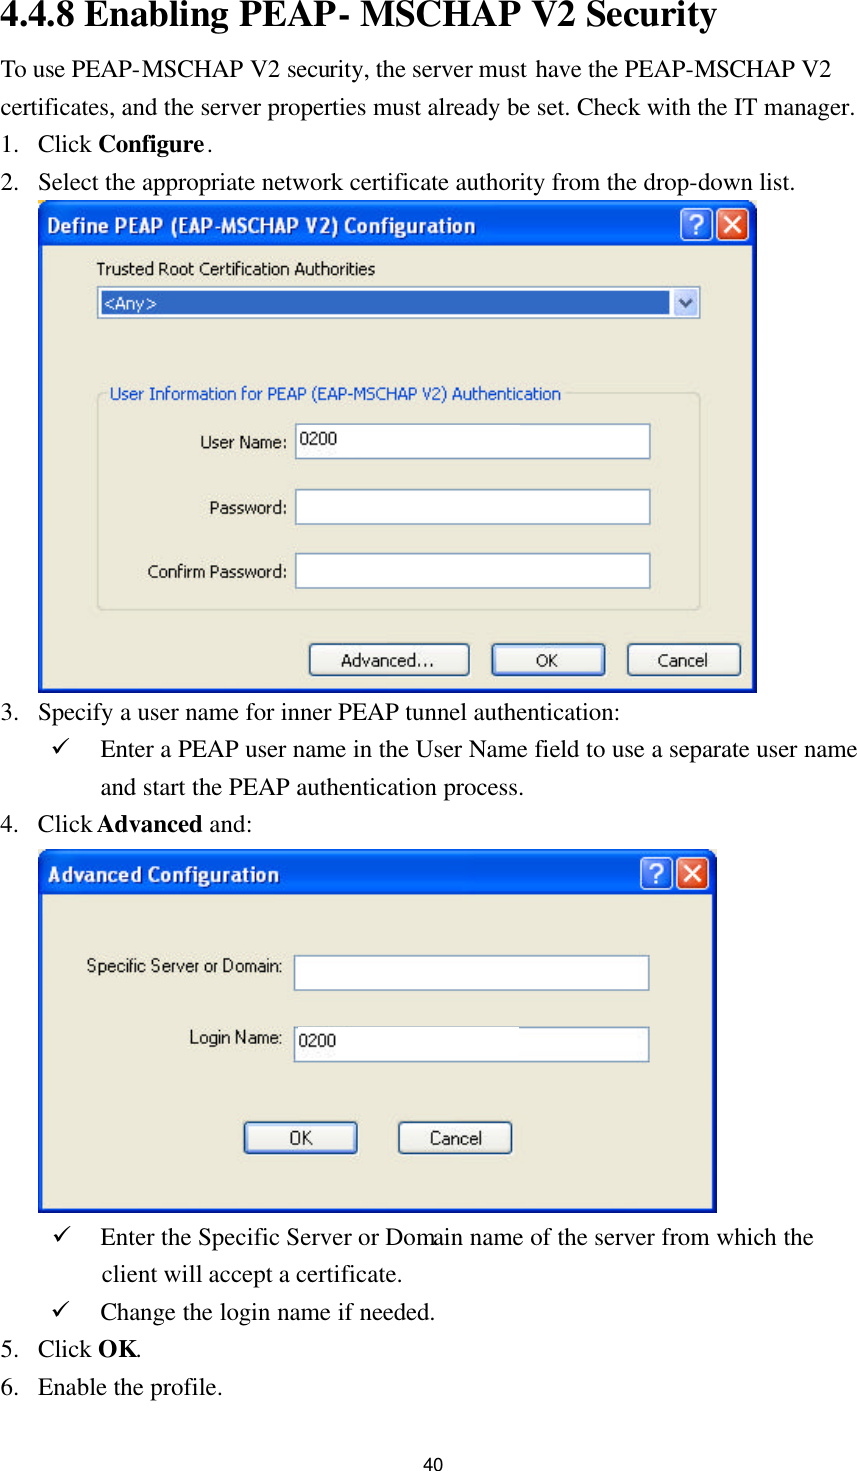 40 4.4.8 Enabling PEAP- MSCHAP V2 Security To use PEAP-MSCHAP V2 security, the server must have the PEAP-MSCHAP V2 certificates, and the server properties must already be set. Check with the IT manager. 1. Click Configure. 2. Select the appropriate network certificate authority from the drop-down list.   3. Specify a user name for inner PEAP tunnel authentication: ü Enter a PEAP user name in the User Name field to use a separate user name and start the PEAP authentication process. 4. Click Advanced and:   ü Enter the Specific Server or Domain name of the server from which the client will accept a certificate. ü Change the login name if needed. 5. Click OK. 6. Enable the profile. 